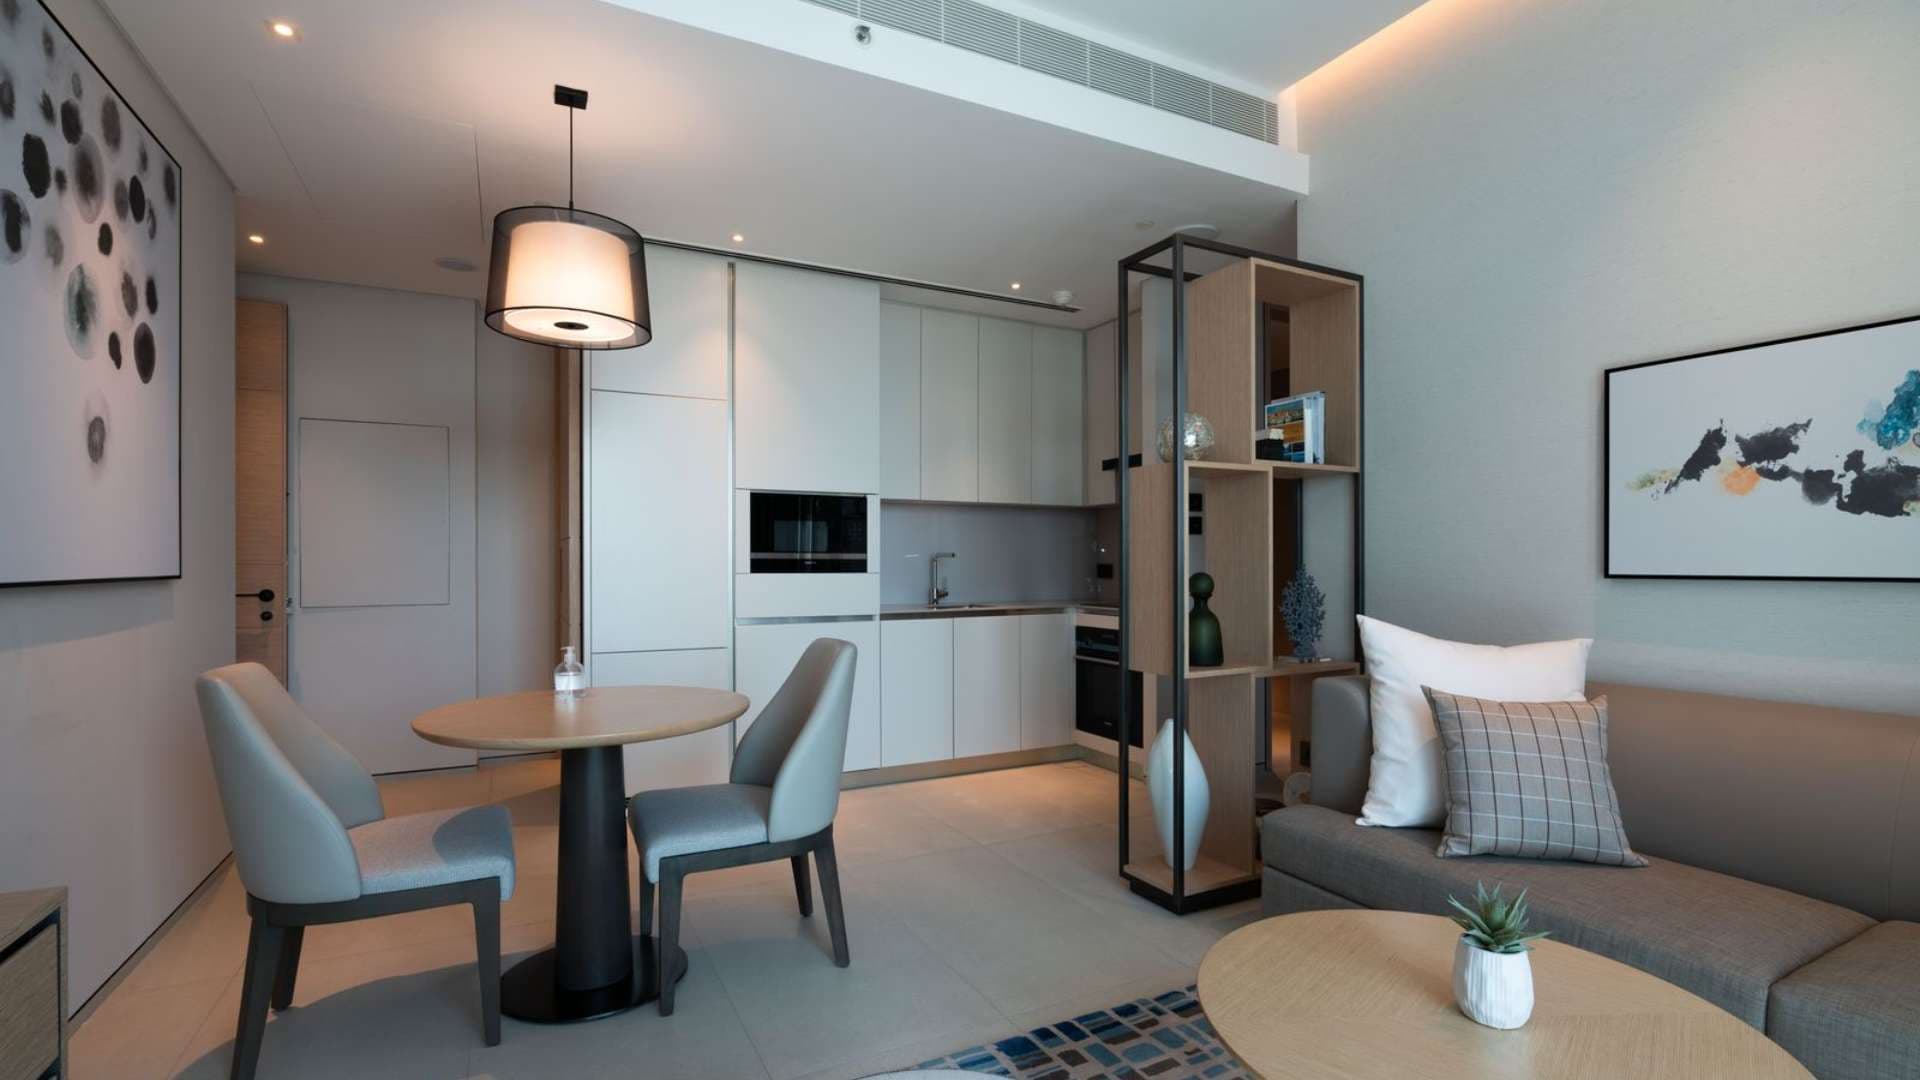 1 Bedroom Serviced Residences For Sale The Address Jumeirah Resort And Spa Lp07070 8801be8a94f7f80.jpeg